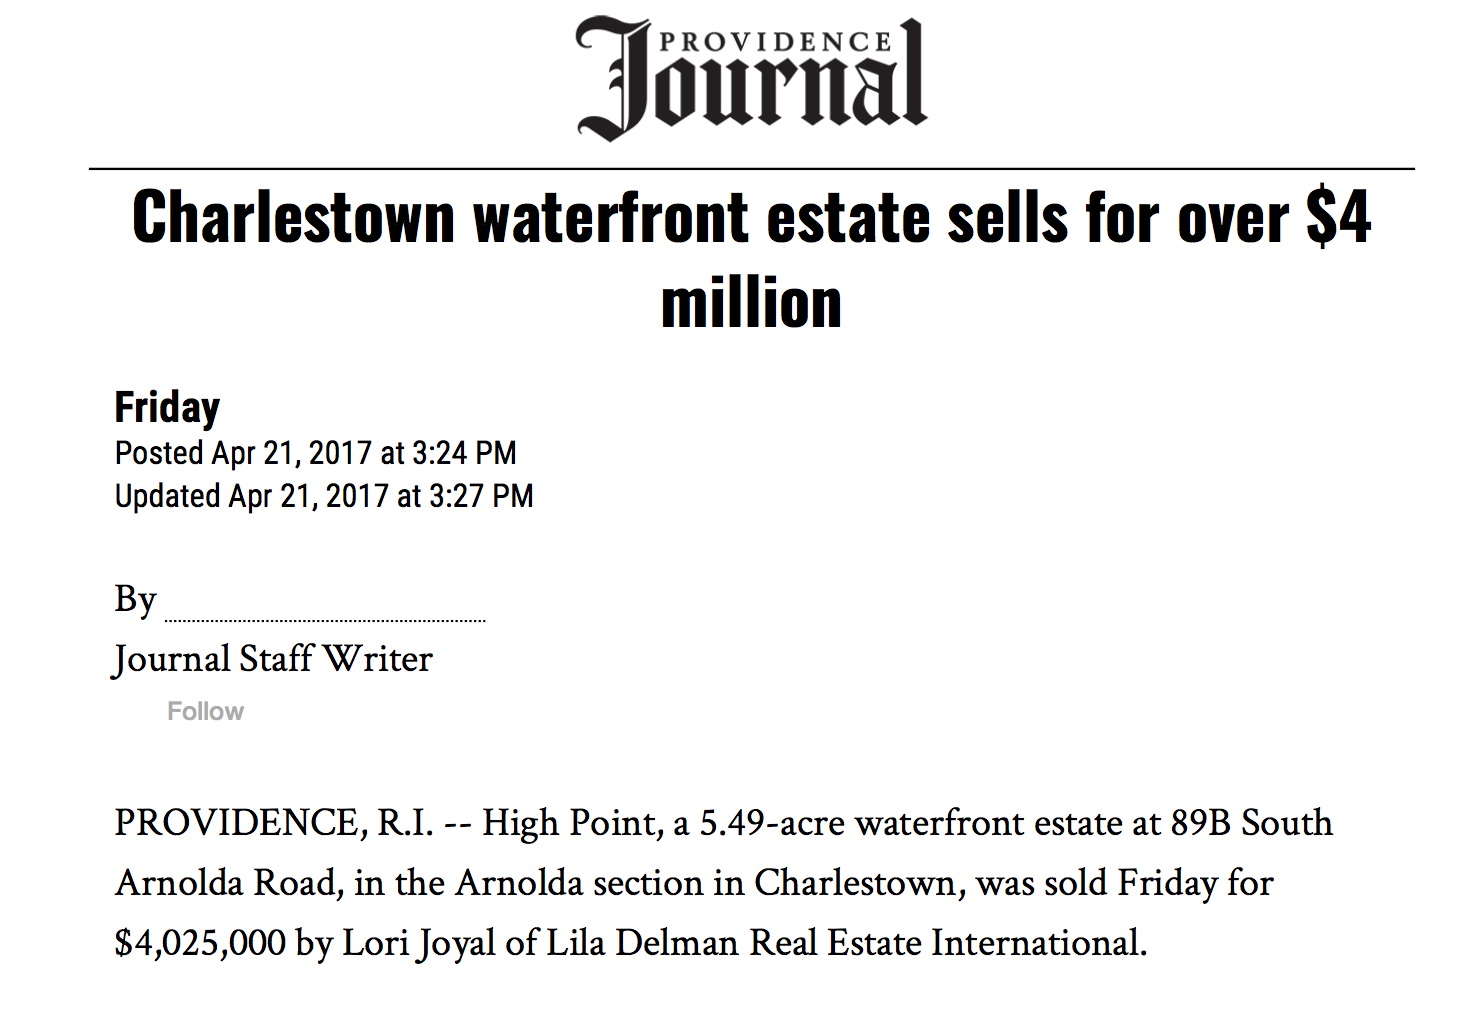 Sale of High Point Featured in the Providence Journal